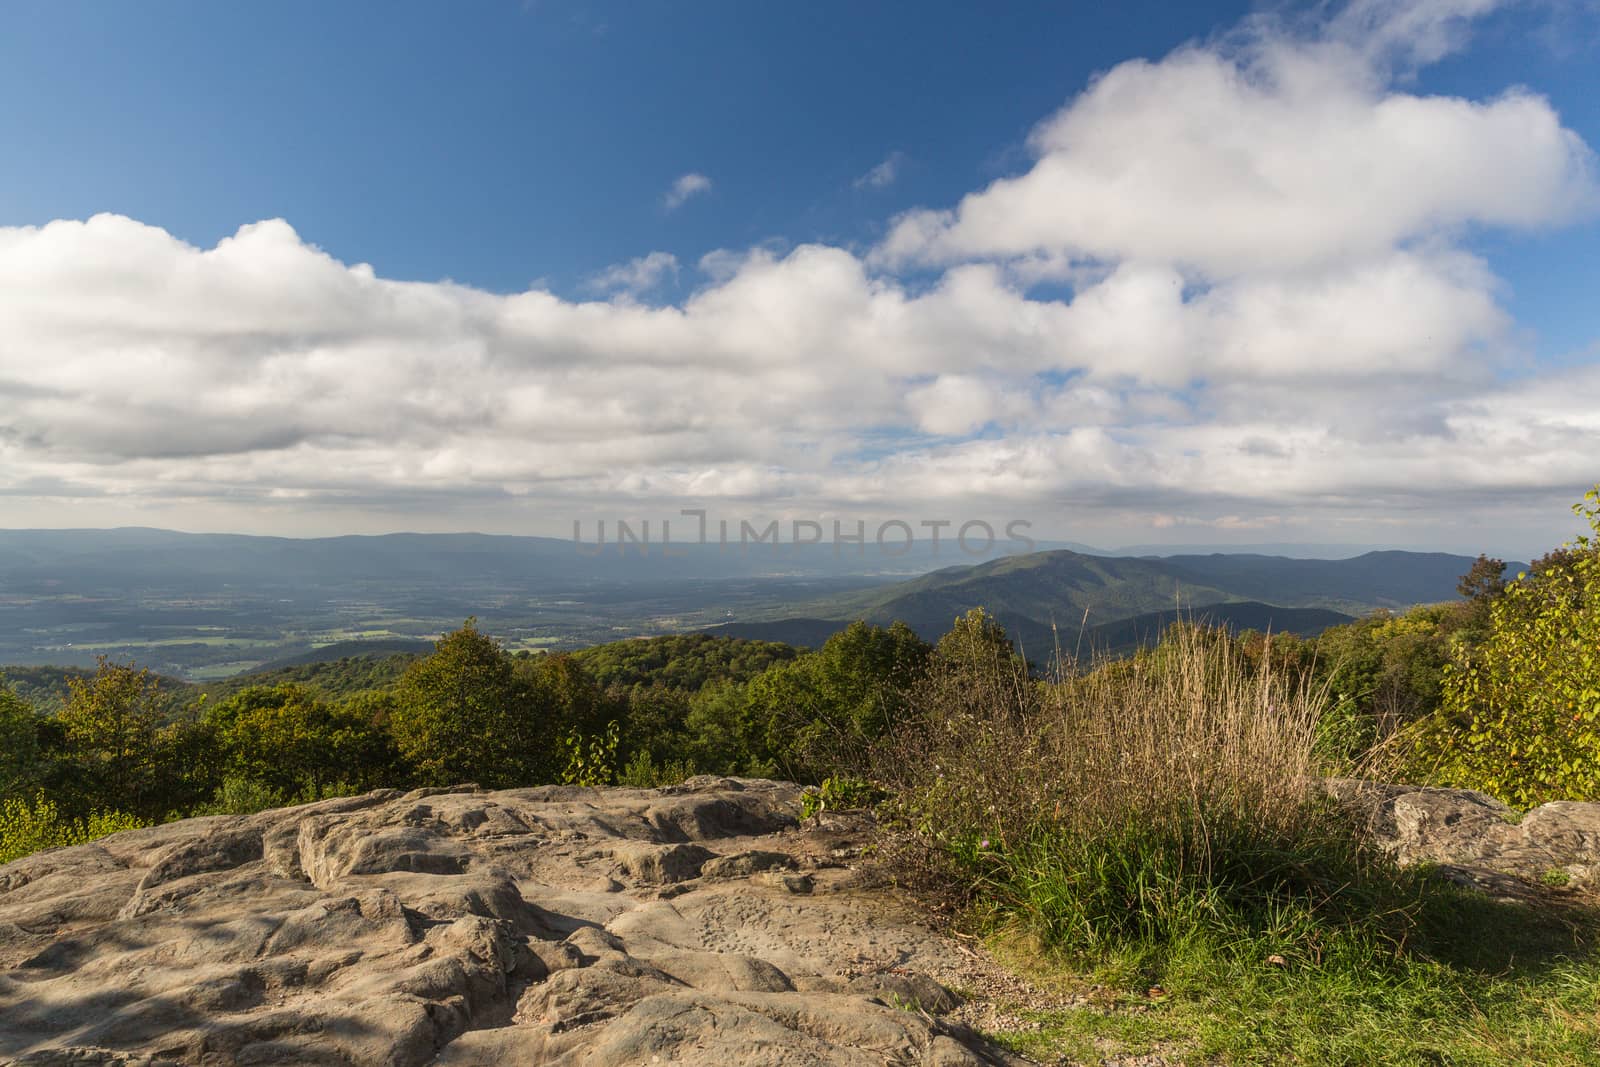 View from the Skyline Drive in Virginia by chrisukphoto